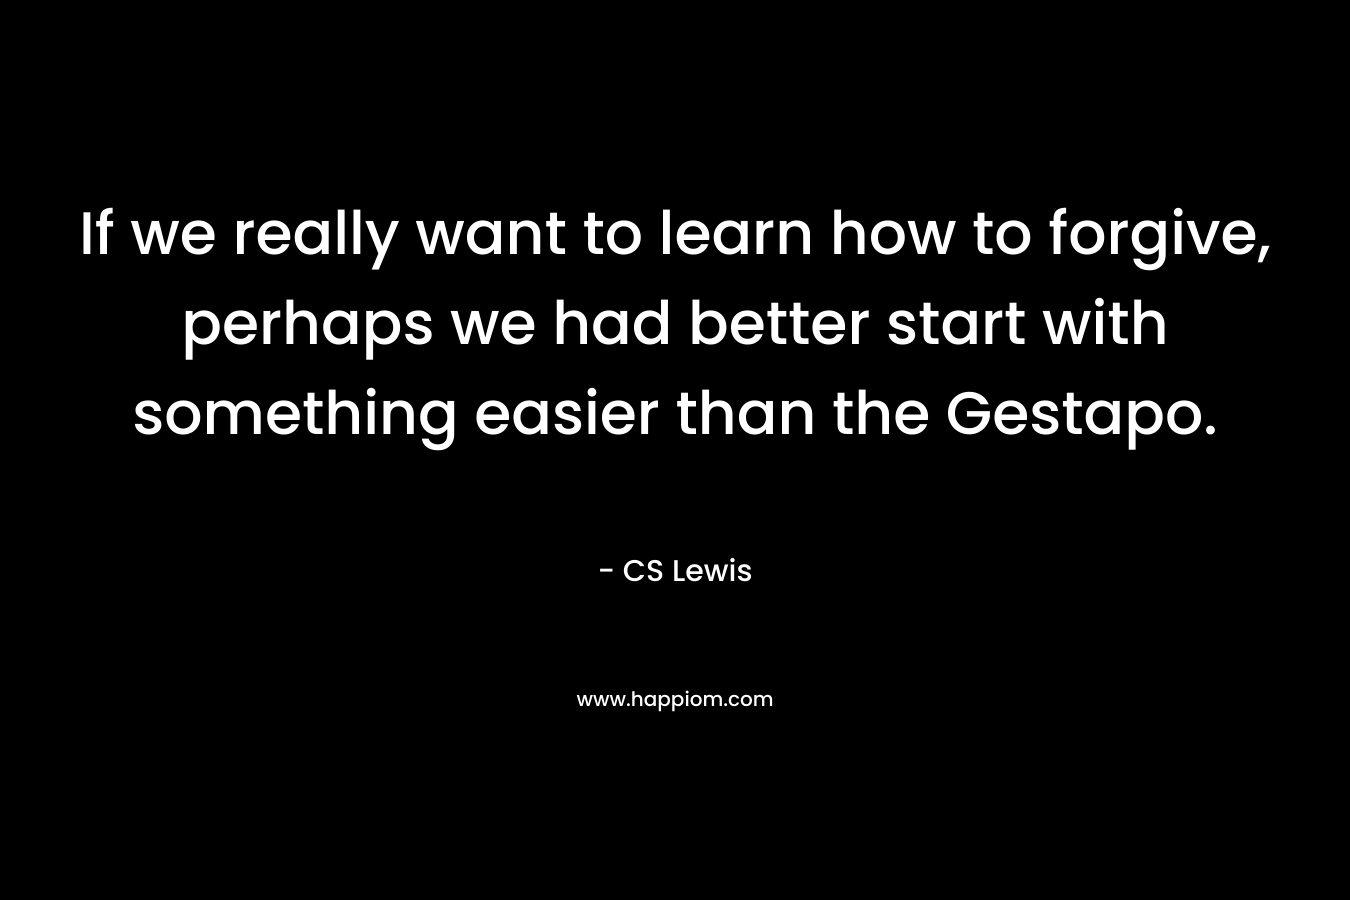 If we really want to learn how to forgive, perhaps we had better start with something easier than the Gestapo. – CS Lewis